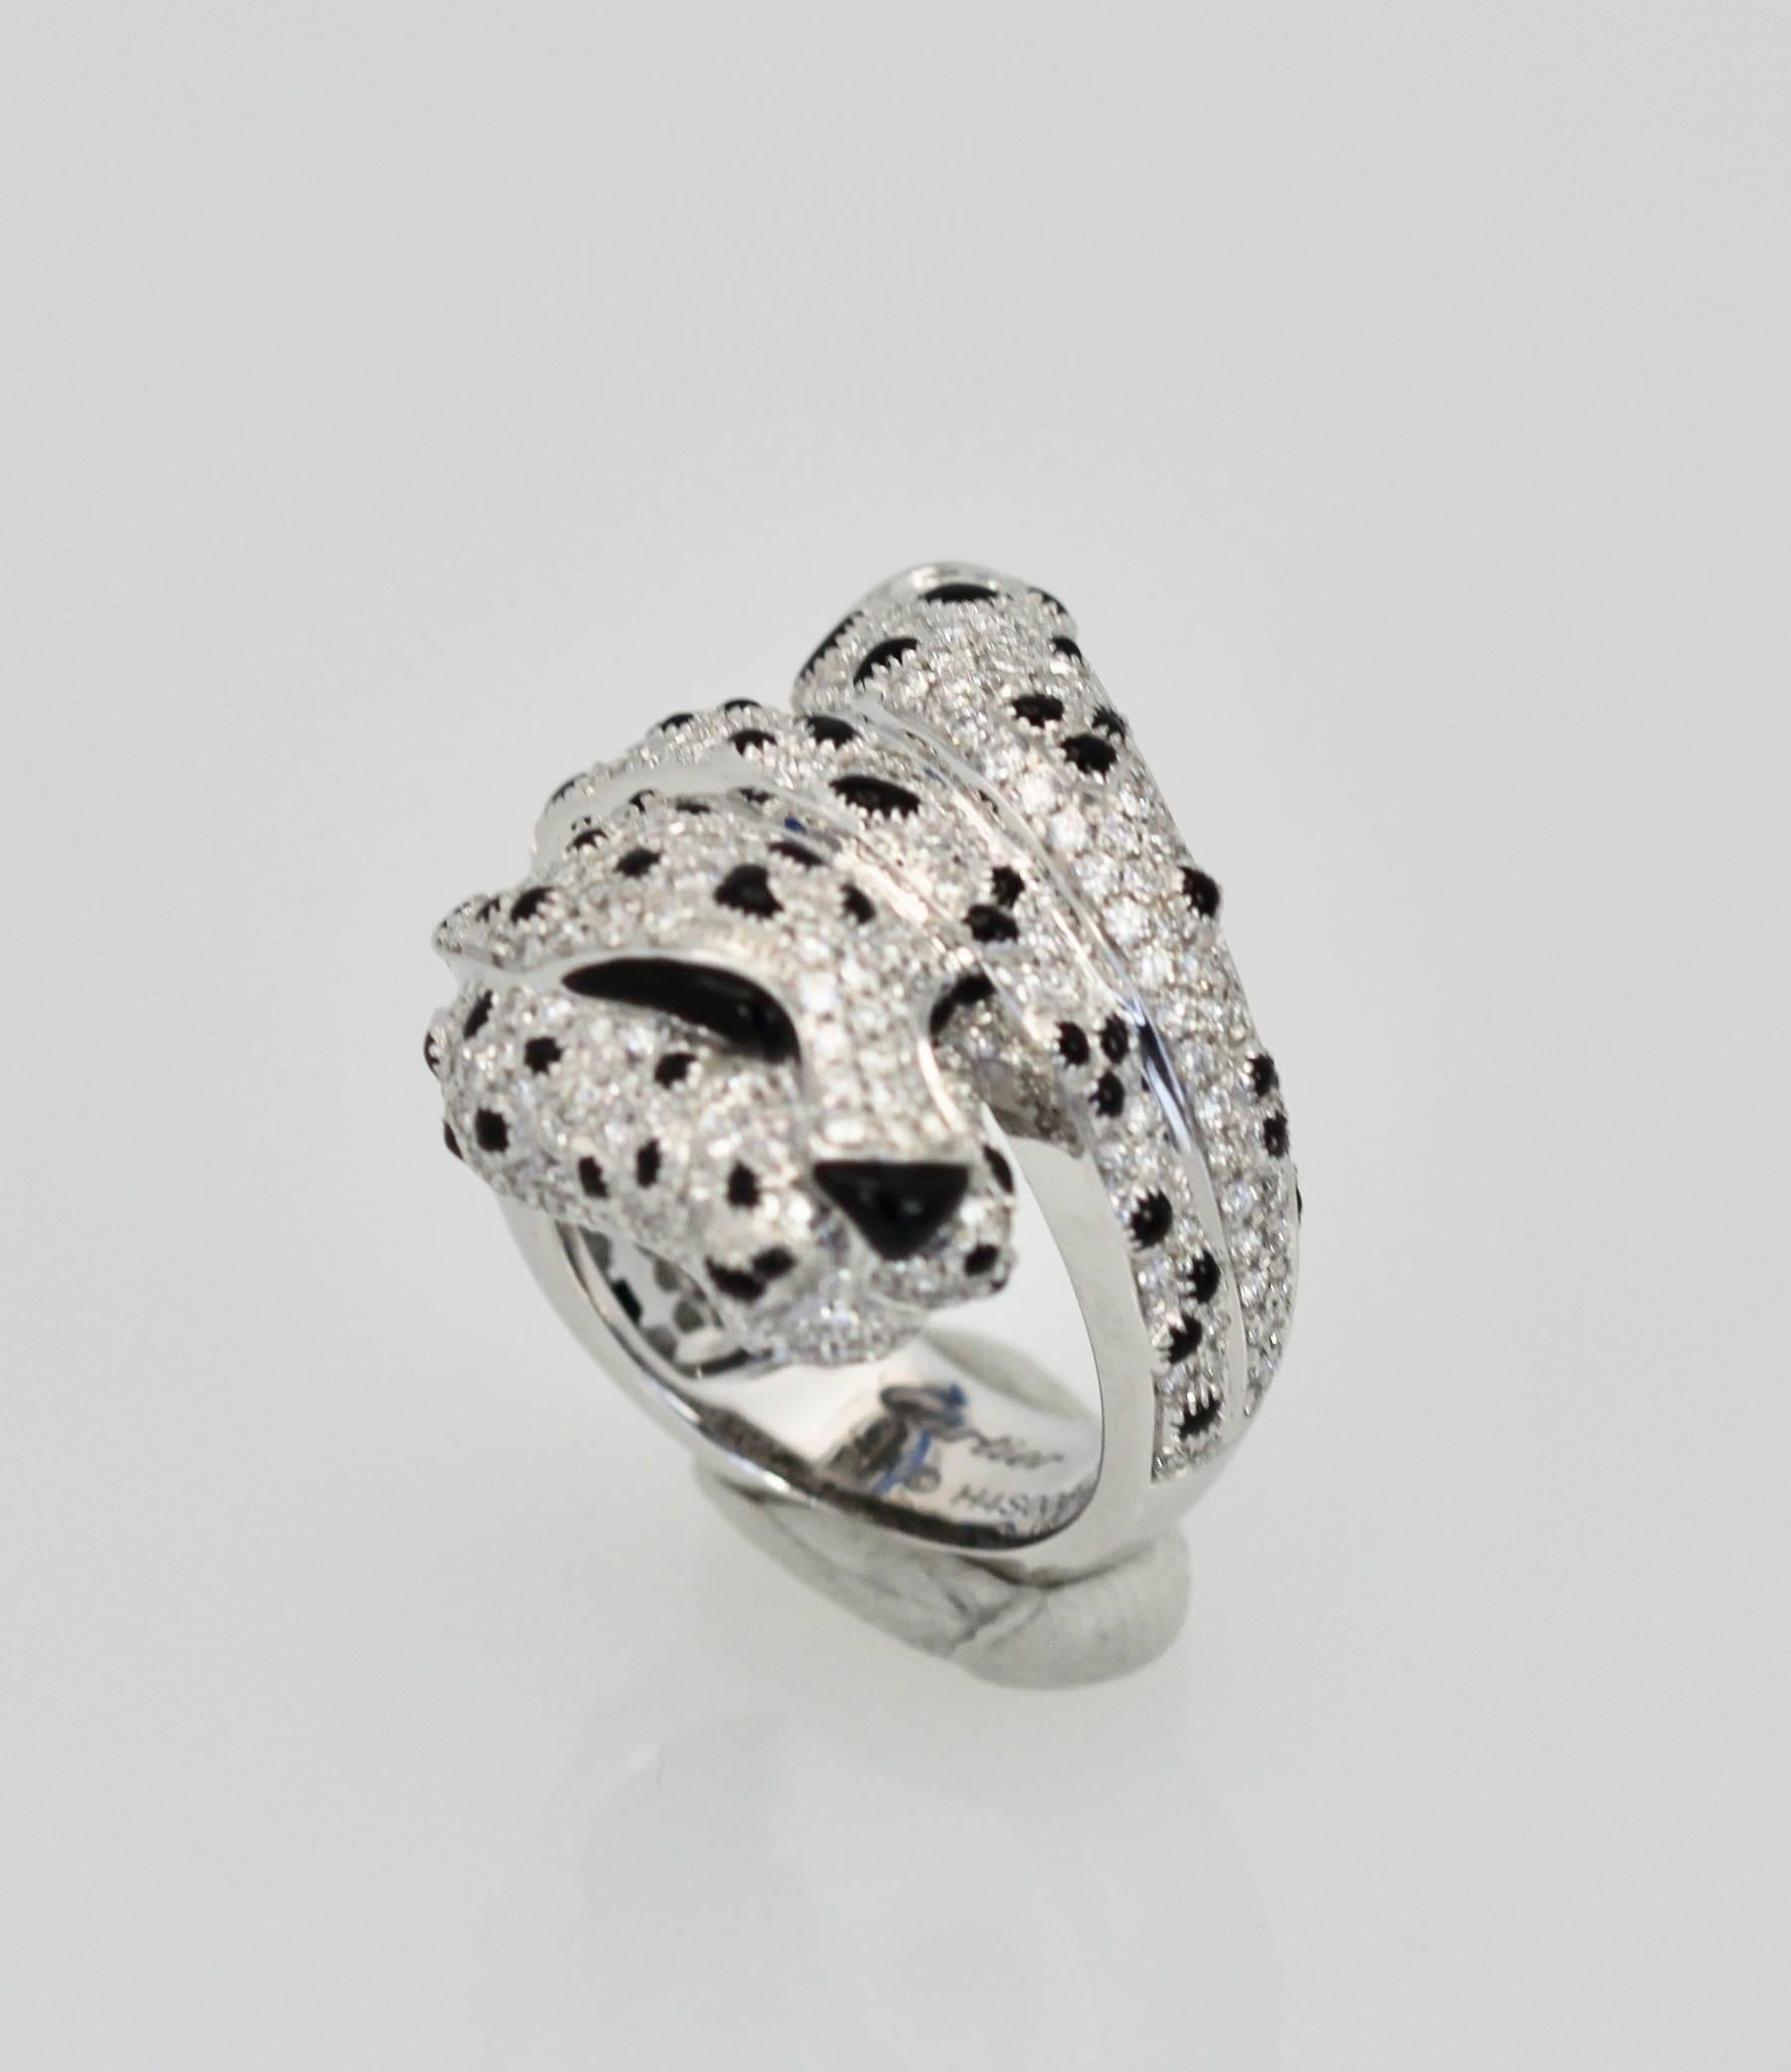 This gorgeous Panthere ring is spectacular and it is retired from the collection.
I call this the bashful Panthere as it looks like it is hiding.  This ring is truly outstanding and unlike all the other Panthere's this one is unique. All the